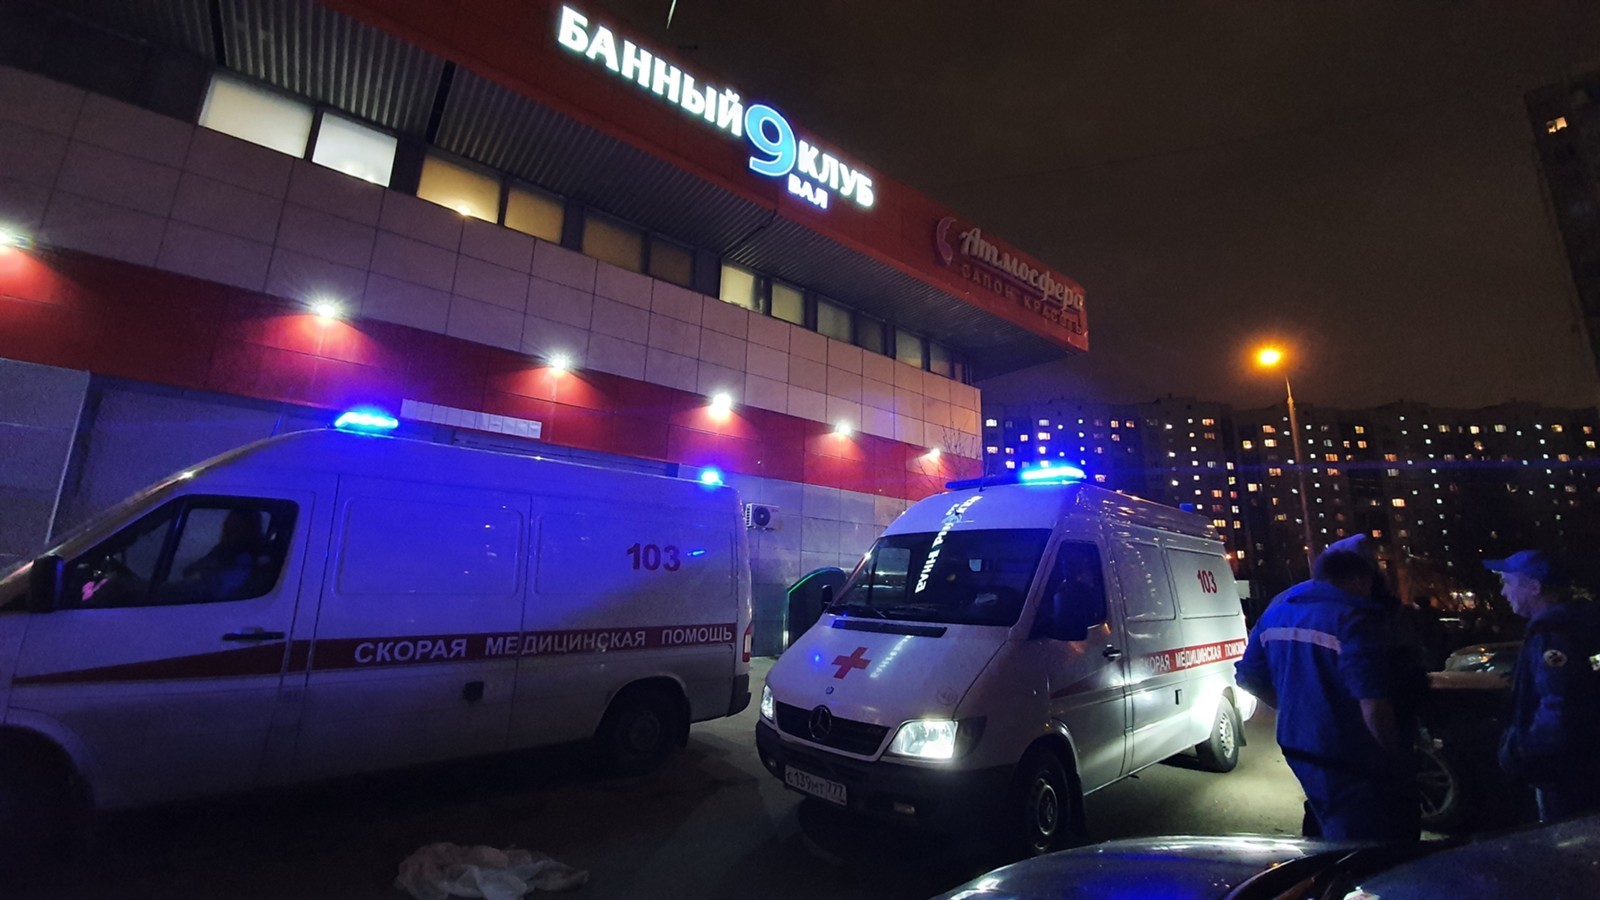 Three people suffered fatal chemical burns from dry ice in the pool - Text, Hospital, Death, Chemical burn, Negative, Bloggers, Ekaterina Didenko